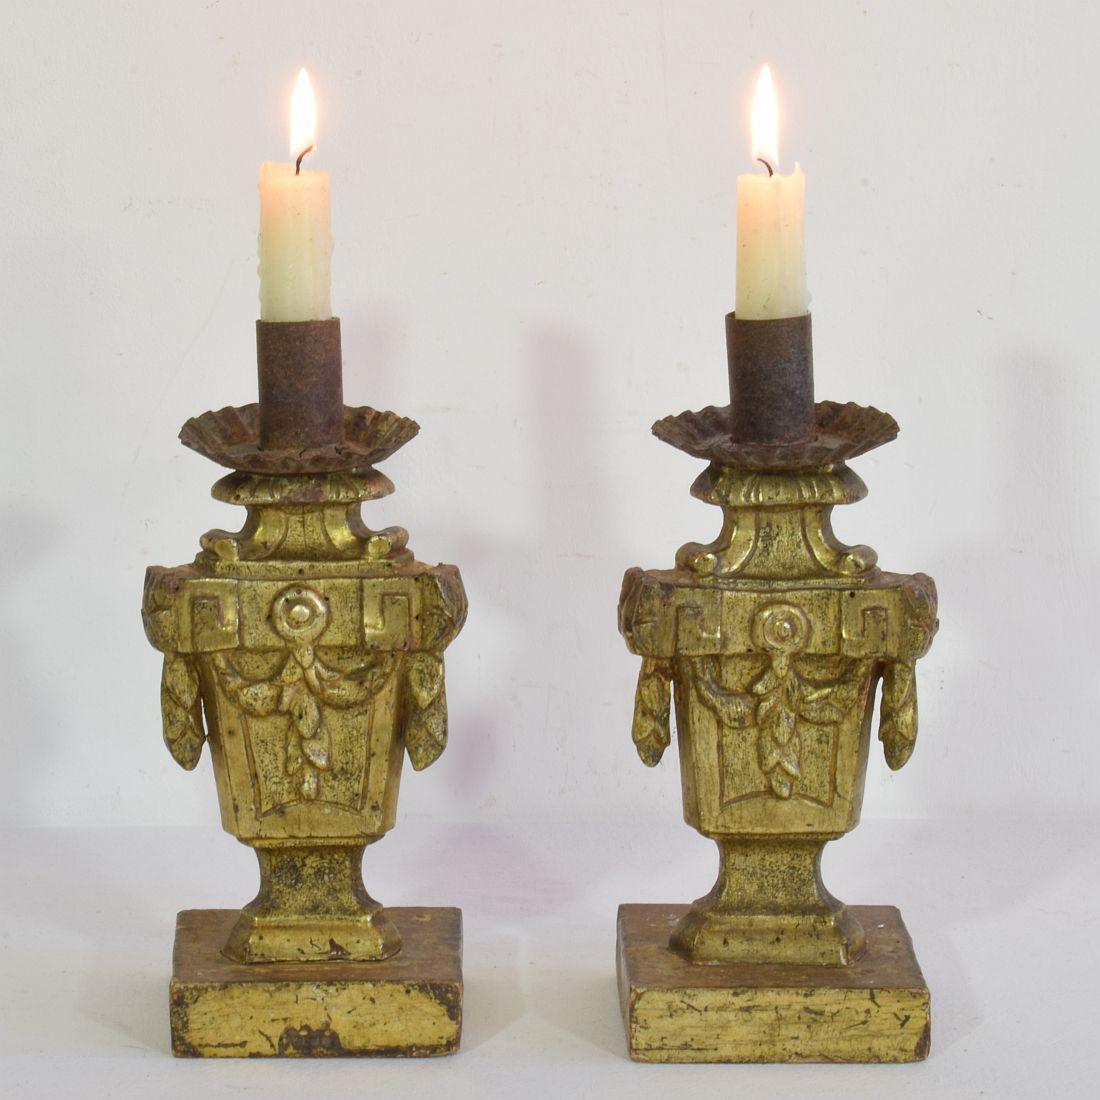 Unique small pair of neoclassical wooden candleholders with their old gilding,
Italy, circa 1760-1780. Weathered, small losses and old repairs. Measurement each.